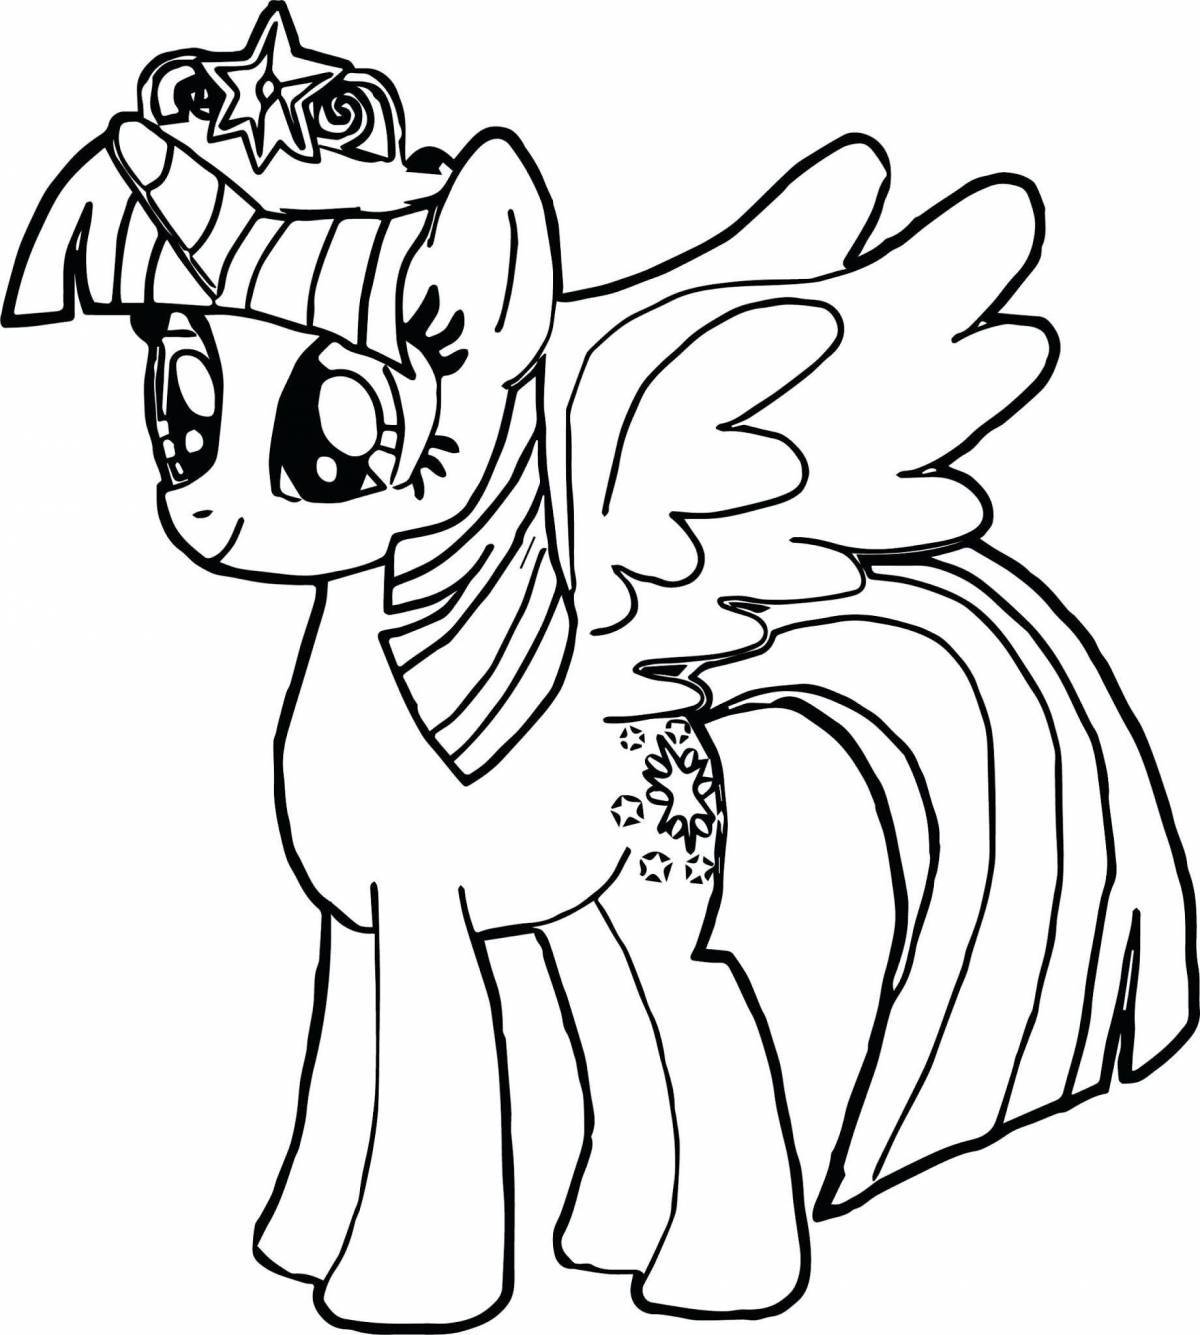 Charming pony sparkle coloring book